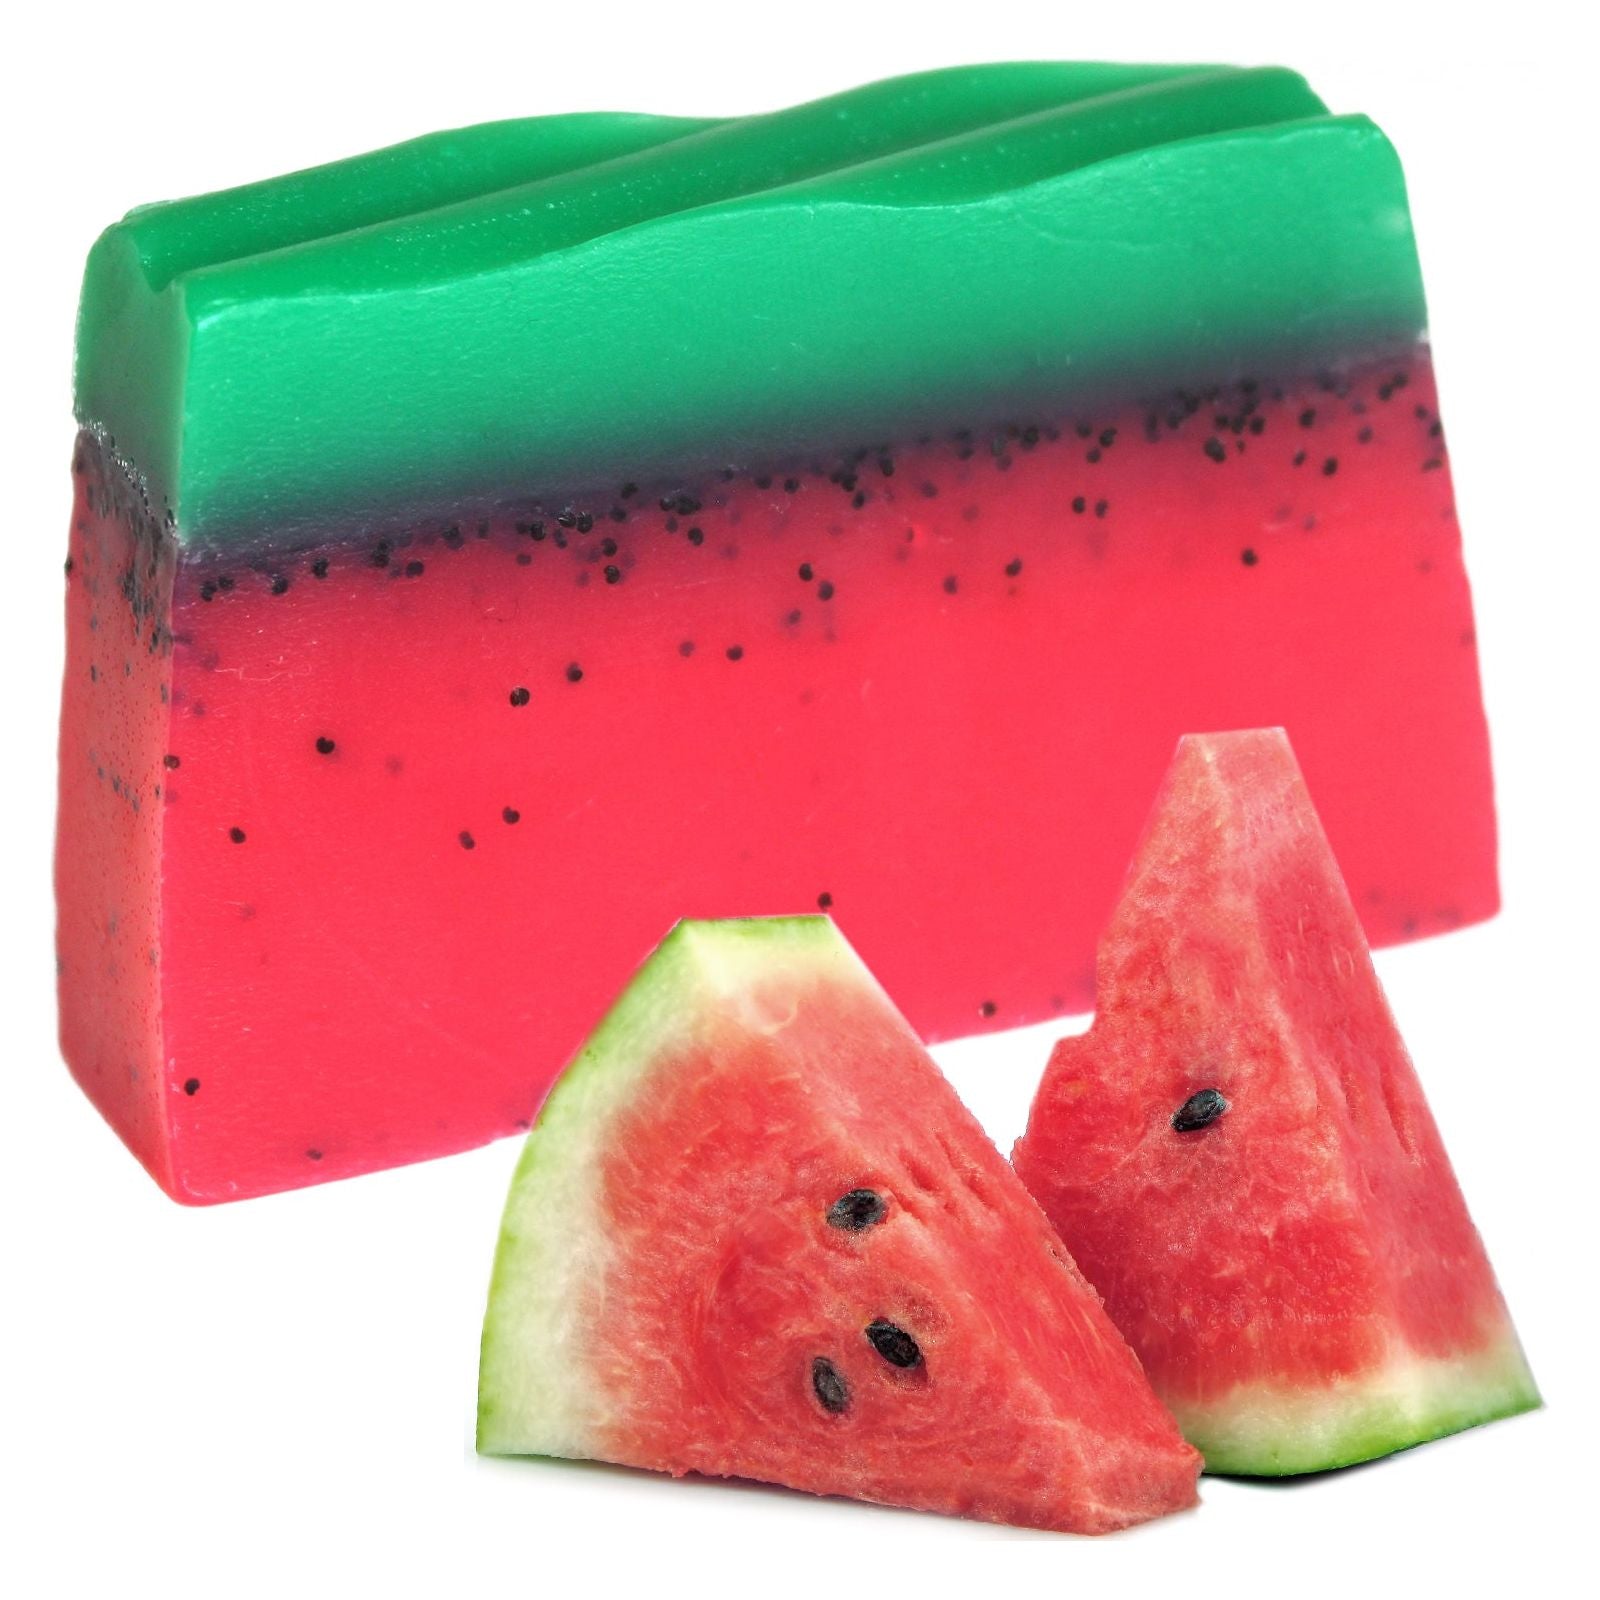 Tropical Paradise Soap - Watermelon - SLICE approx 100g - Ashton and Finch